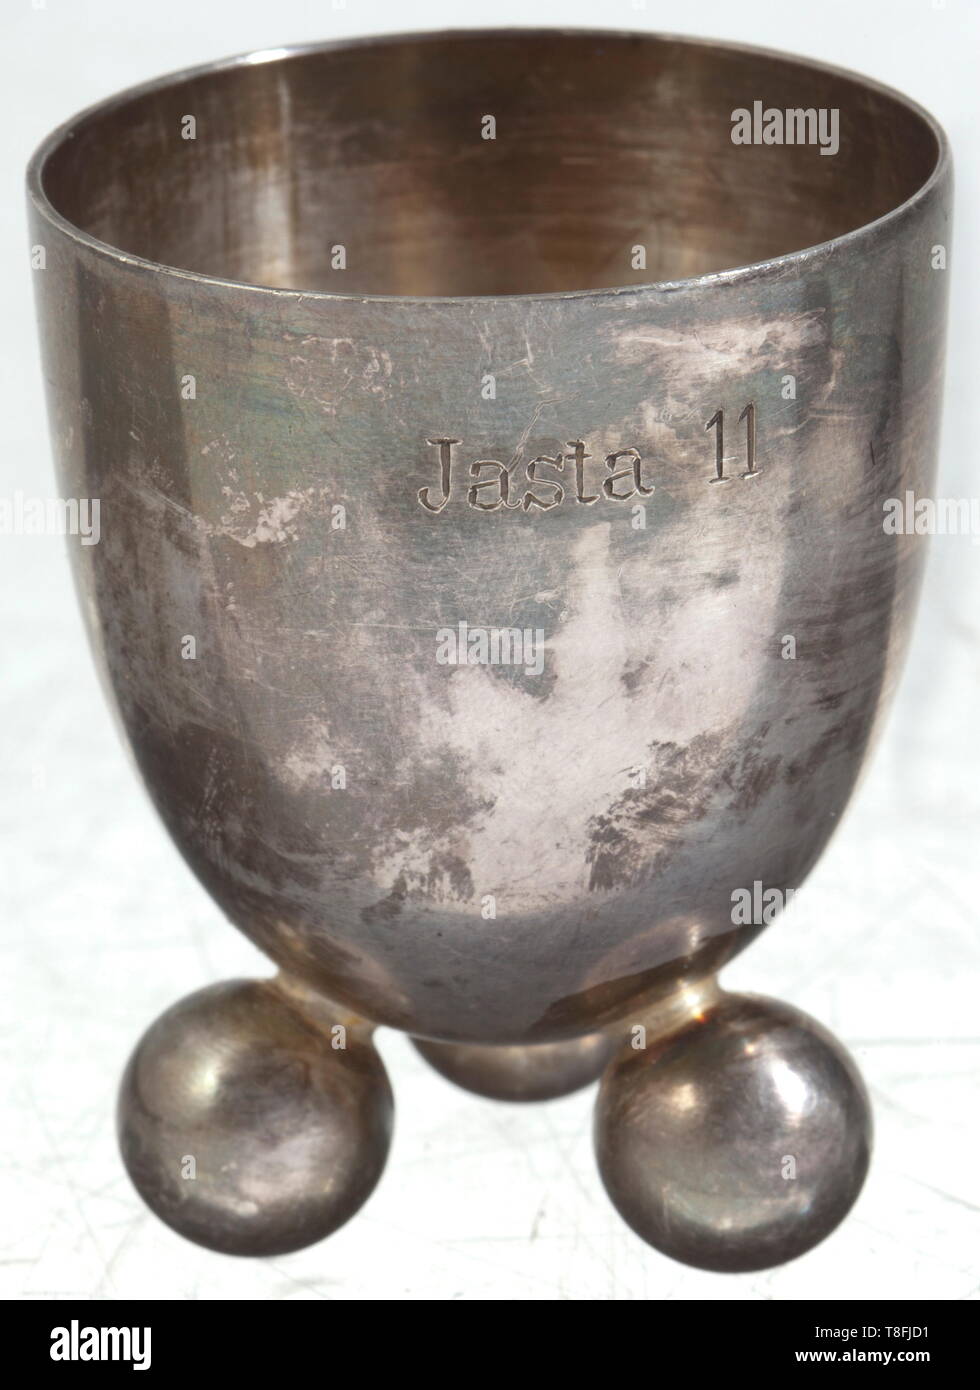 Five victory beakers of JASTA 11 Silver-plated, semi-elliptical cups (WMF) on ball feet, each engraved with 'Dem Sieger im Luftkampf' and 'Jasta 11'. Height of each 5 cm. Some of the most successful fighter pilots of the First World War served in the legendary JASTA 11 (Richthofen, Almenröder, Wolff). historic, historical, troop, troops, armed forces, military, militaria, army, wing, group, air force, air forces, 20th century, Editorial-Use-Only Stock Photo